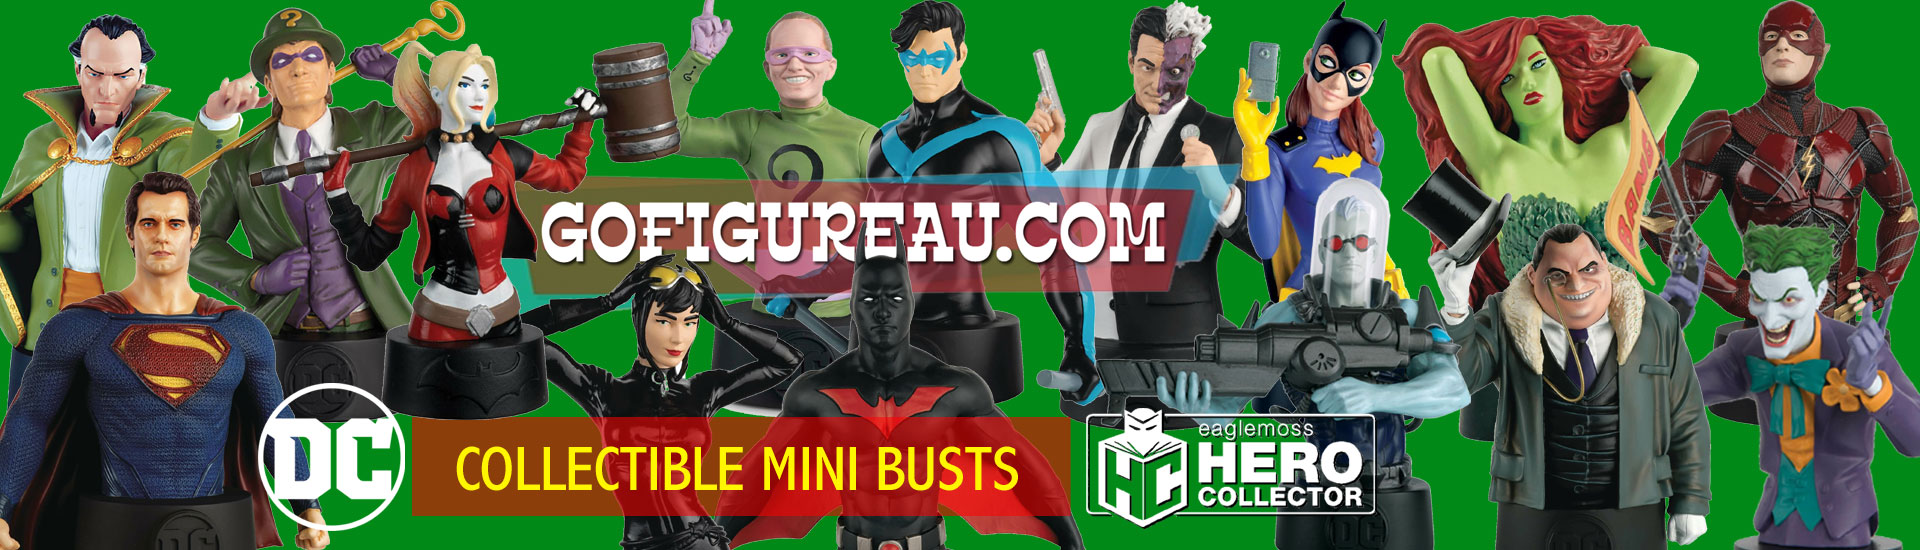 dc-busts-gofigure-banner